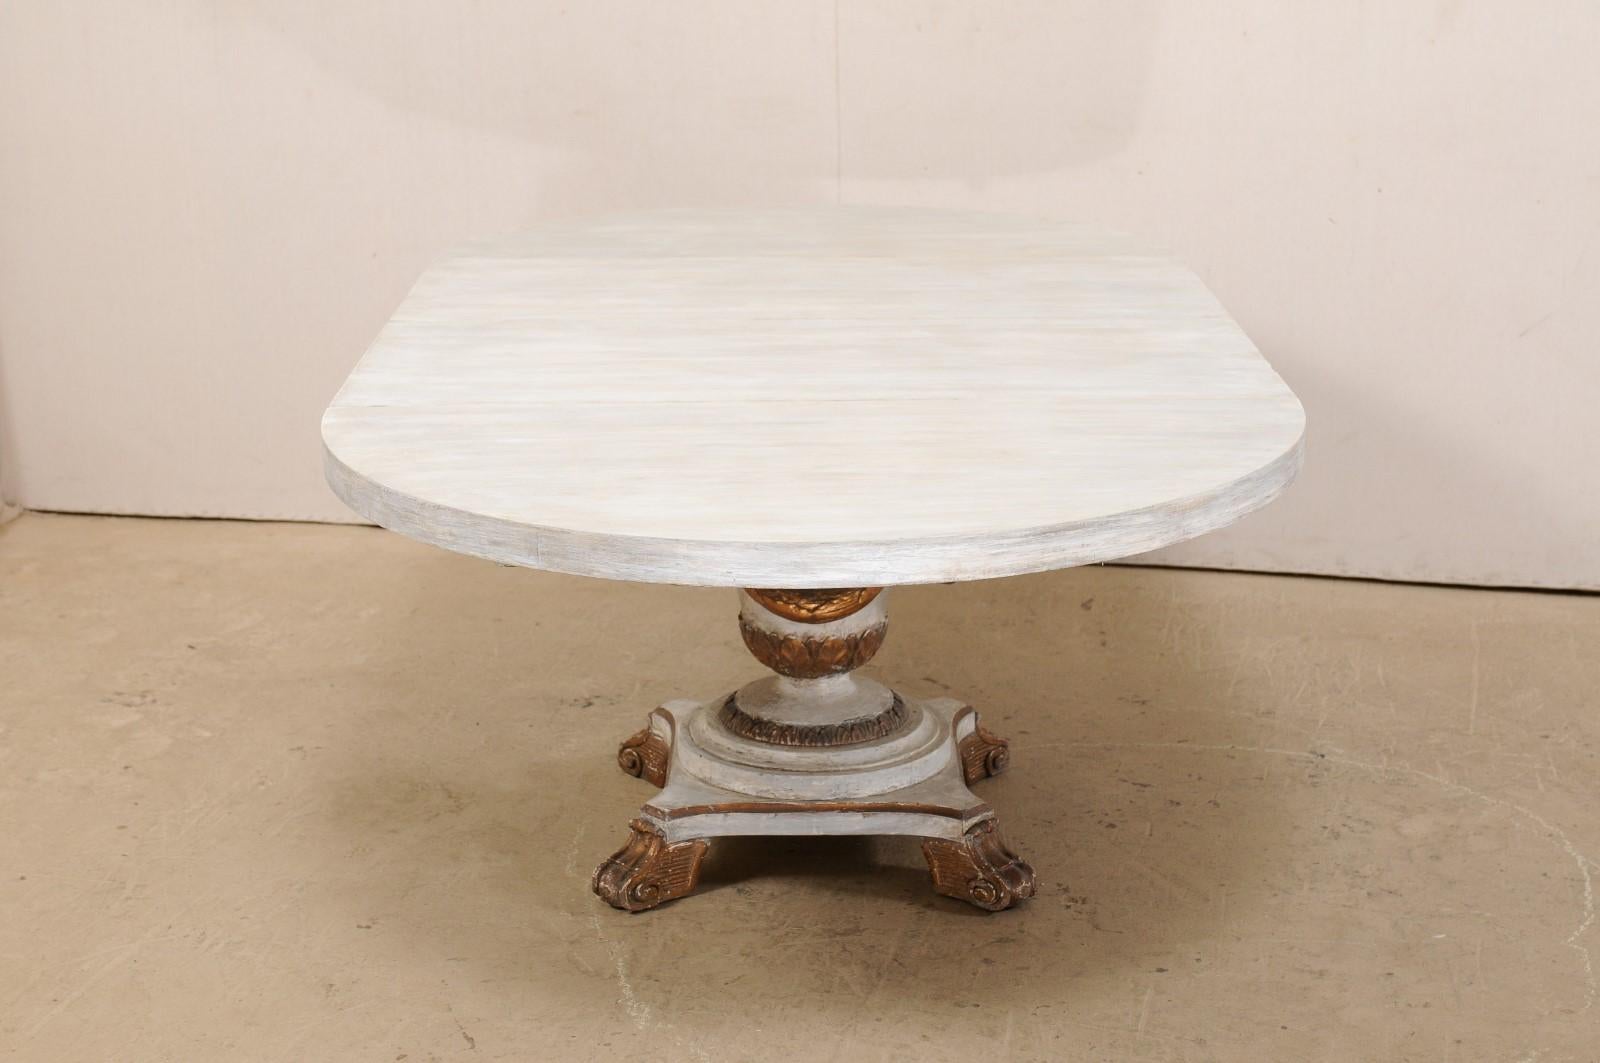 Wood Neoclassical Style Pedestal Table with Leaves, Can be Oval or Round Shaped